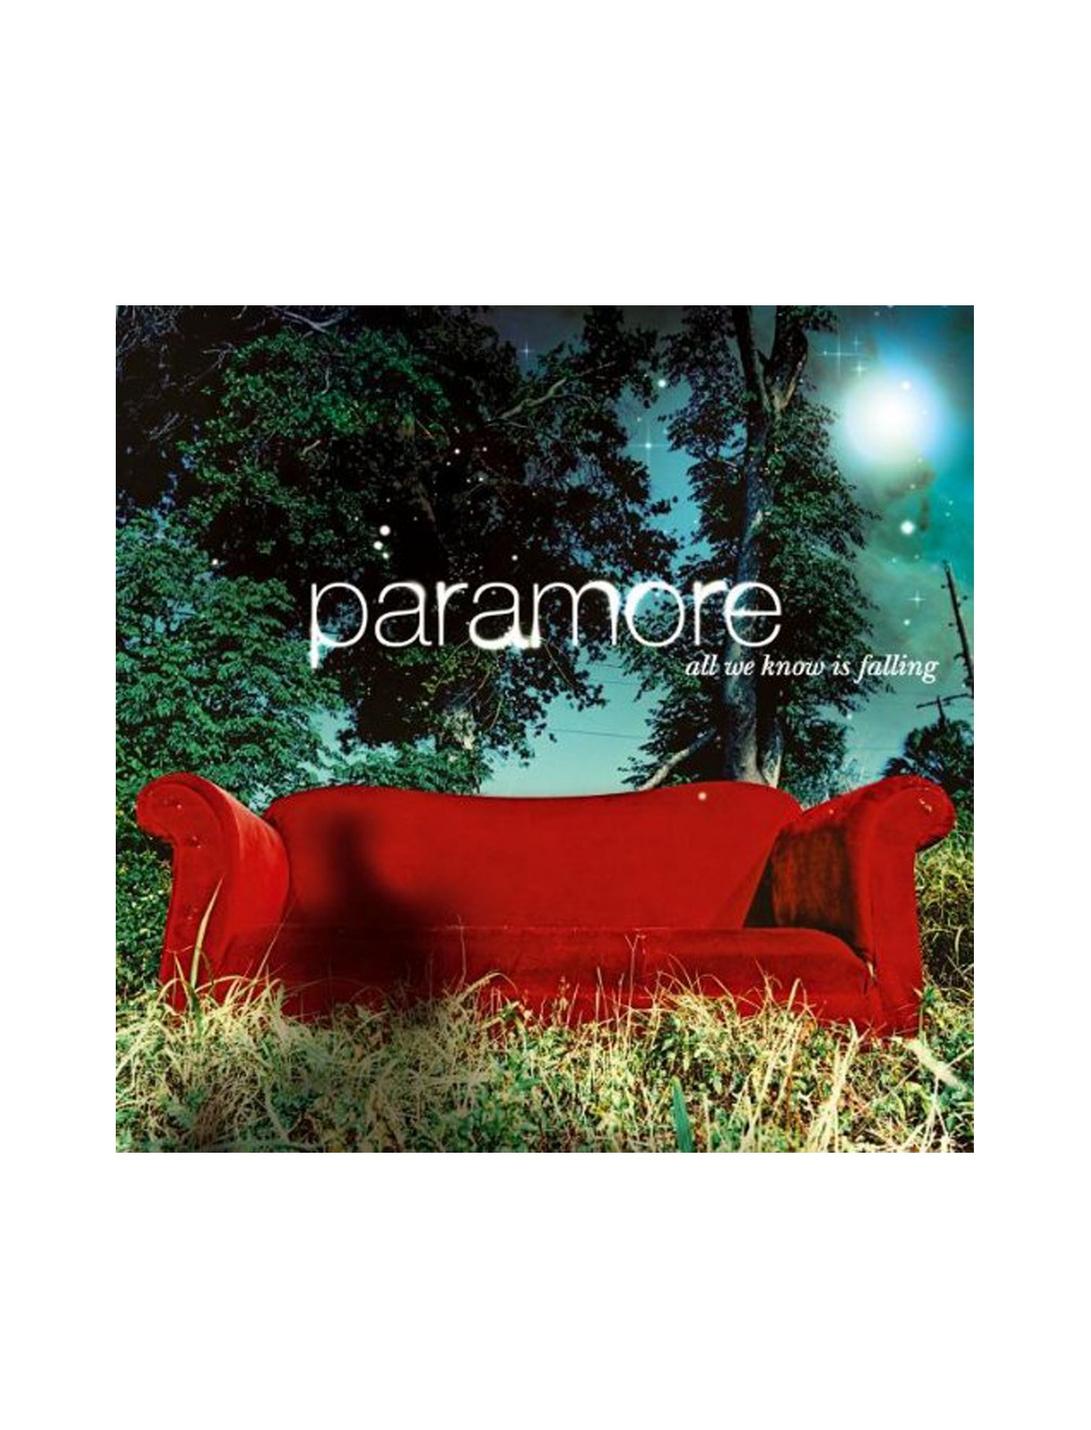 Paramore - All We Know Is Falling Vinyl LP Hot Topic Exclusive, , hi-res